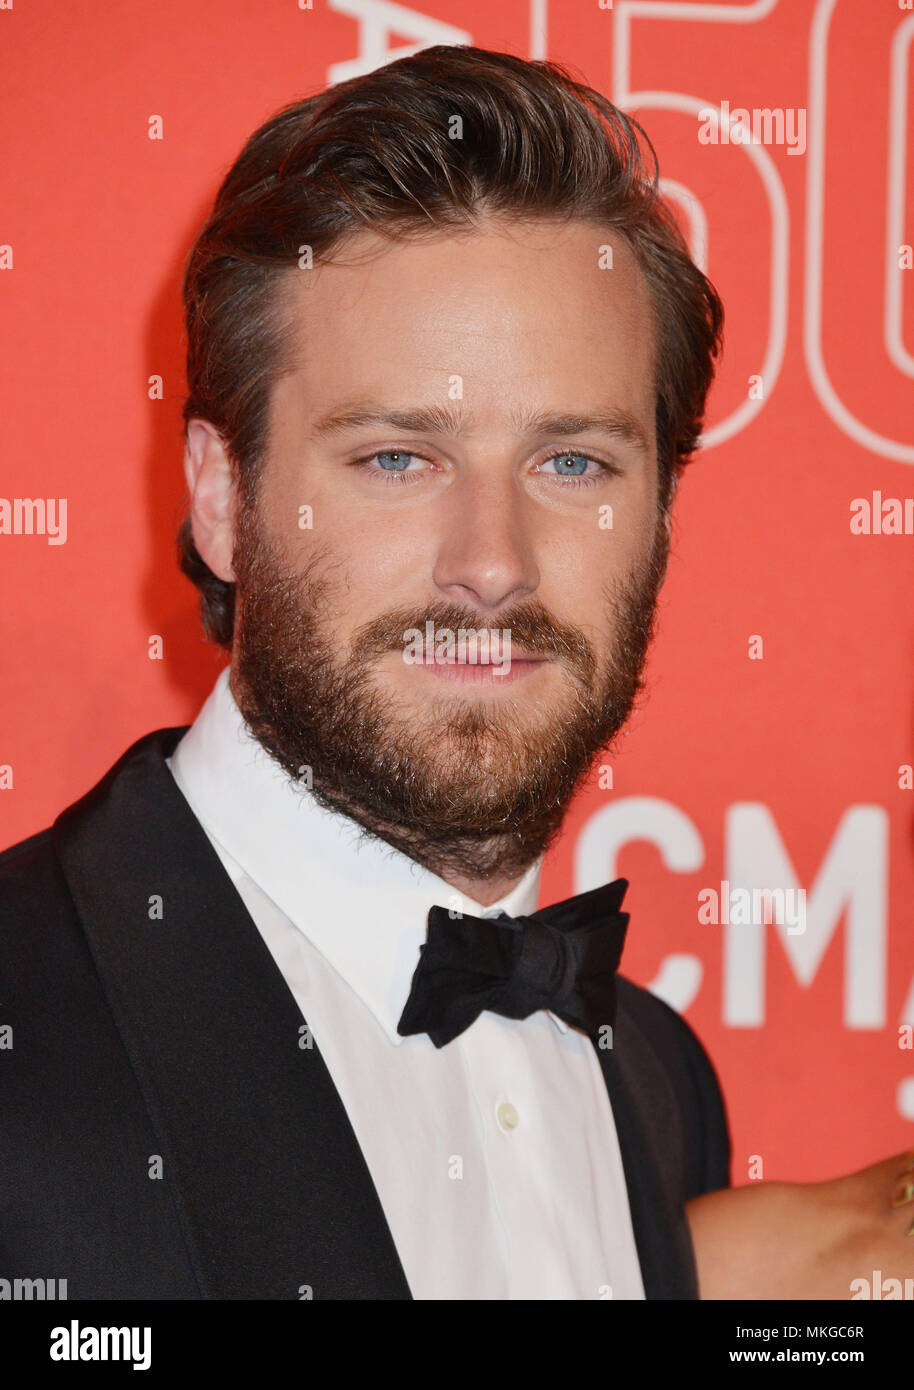 Armie Hammer 055 at the  LACMA 50th Ann. Gala 2015 at the LACMA Museum in Los Angeles. April 18, 2015.Armie Hammer 055  Event in Hollywood Life - California,  Red Carpet Event, Vertical, USA, Film Industry, Celebrities,  Photography, Bestof, Arts Culture and Entertainment, Topix Celebrities fashion / one person, Vertical, Best of, Hollywood Life, Event in Hollywood Life - California,  Red Carpet and backstage, USA, Film Industry, Celebrities,  movie celebrities, TV celebrities, Music celebrities, Photography, Bestof, Arts Culture and Entertainment,  Topix, headshot, vertical, from the year , 2 Stock Photo